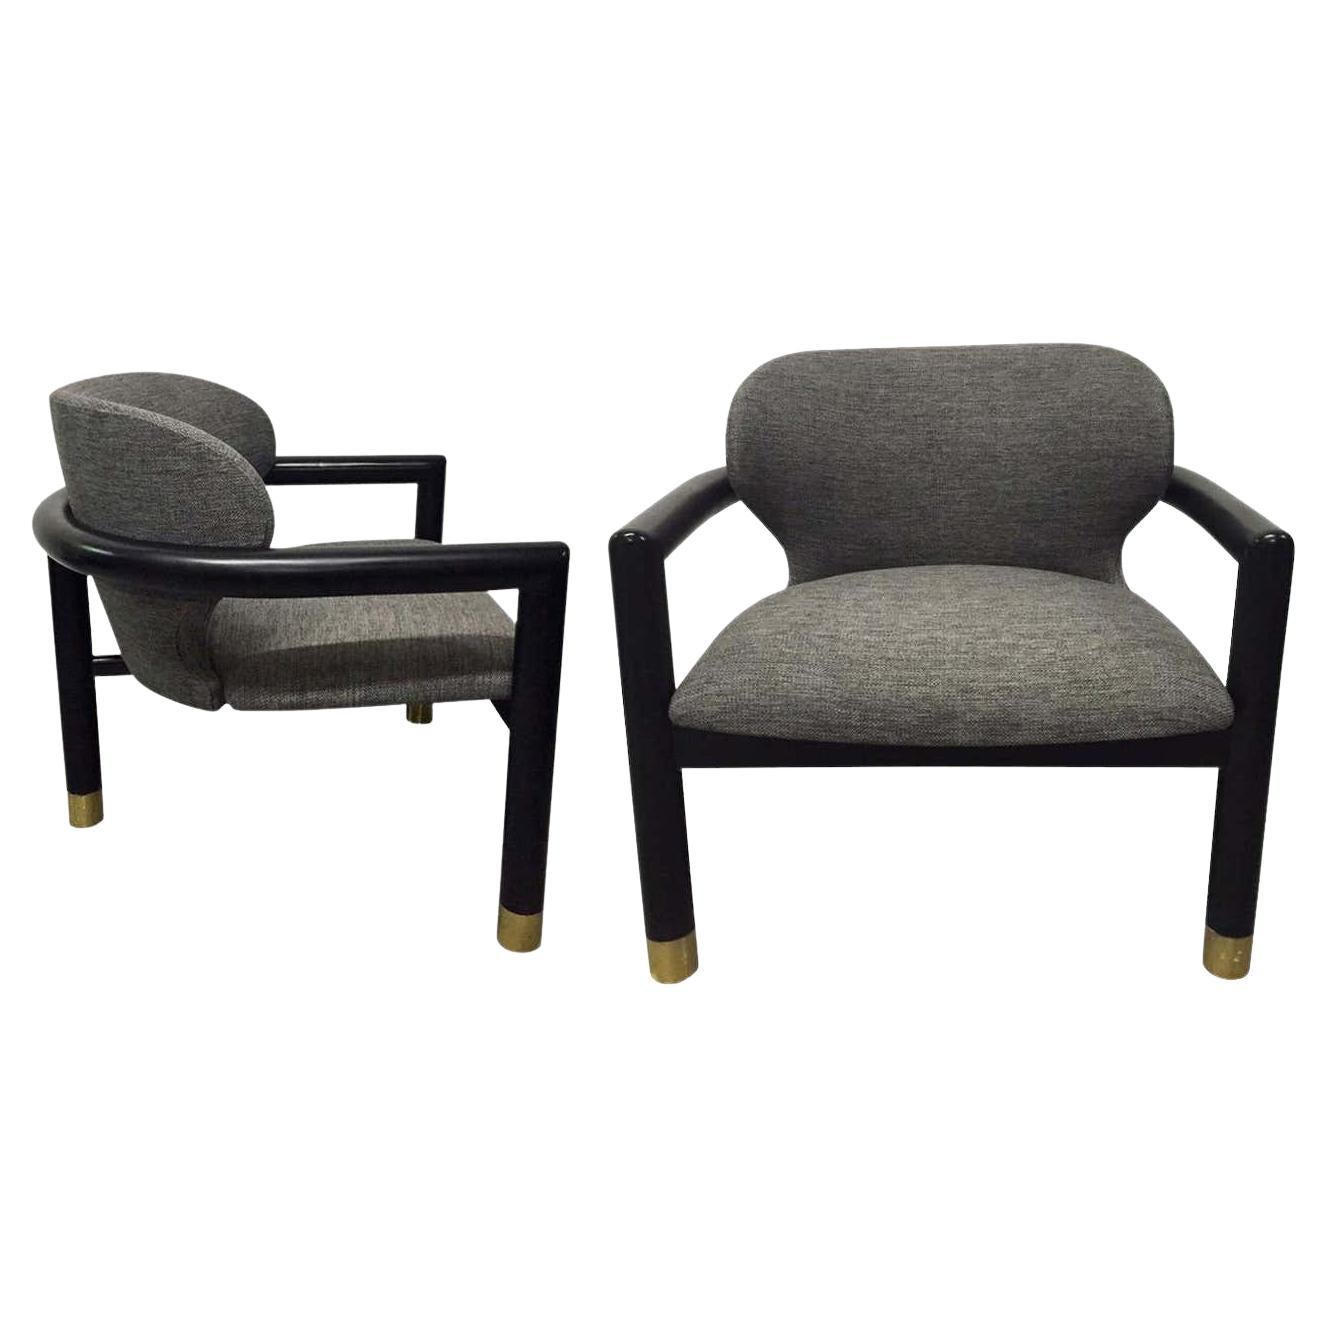 Pair of Sculptural Lounge Chairs For Sale